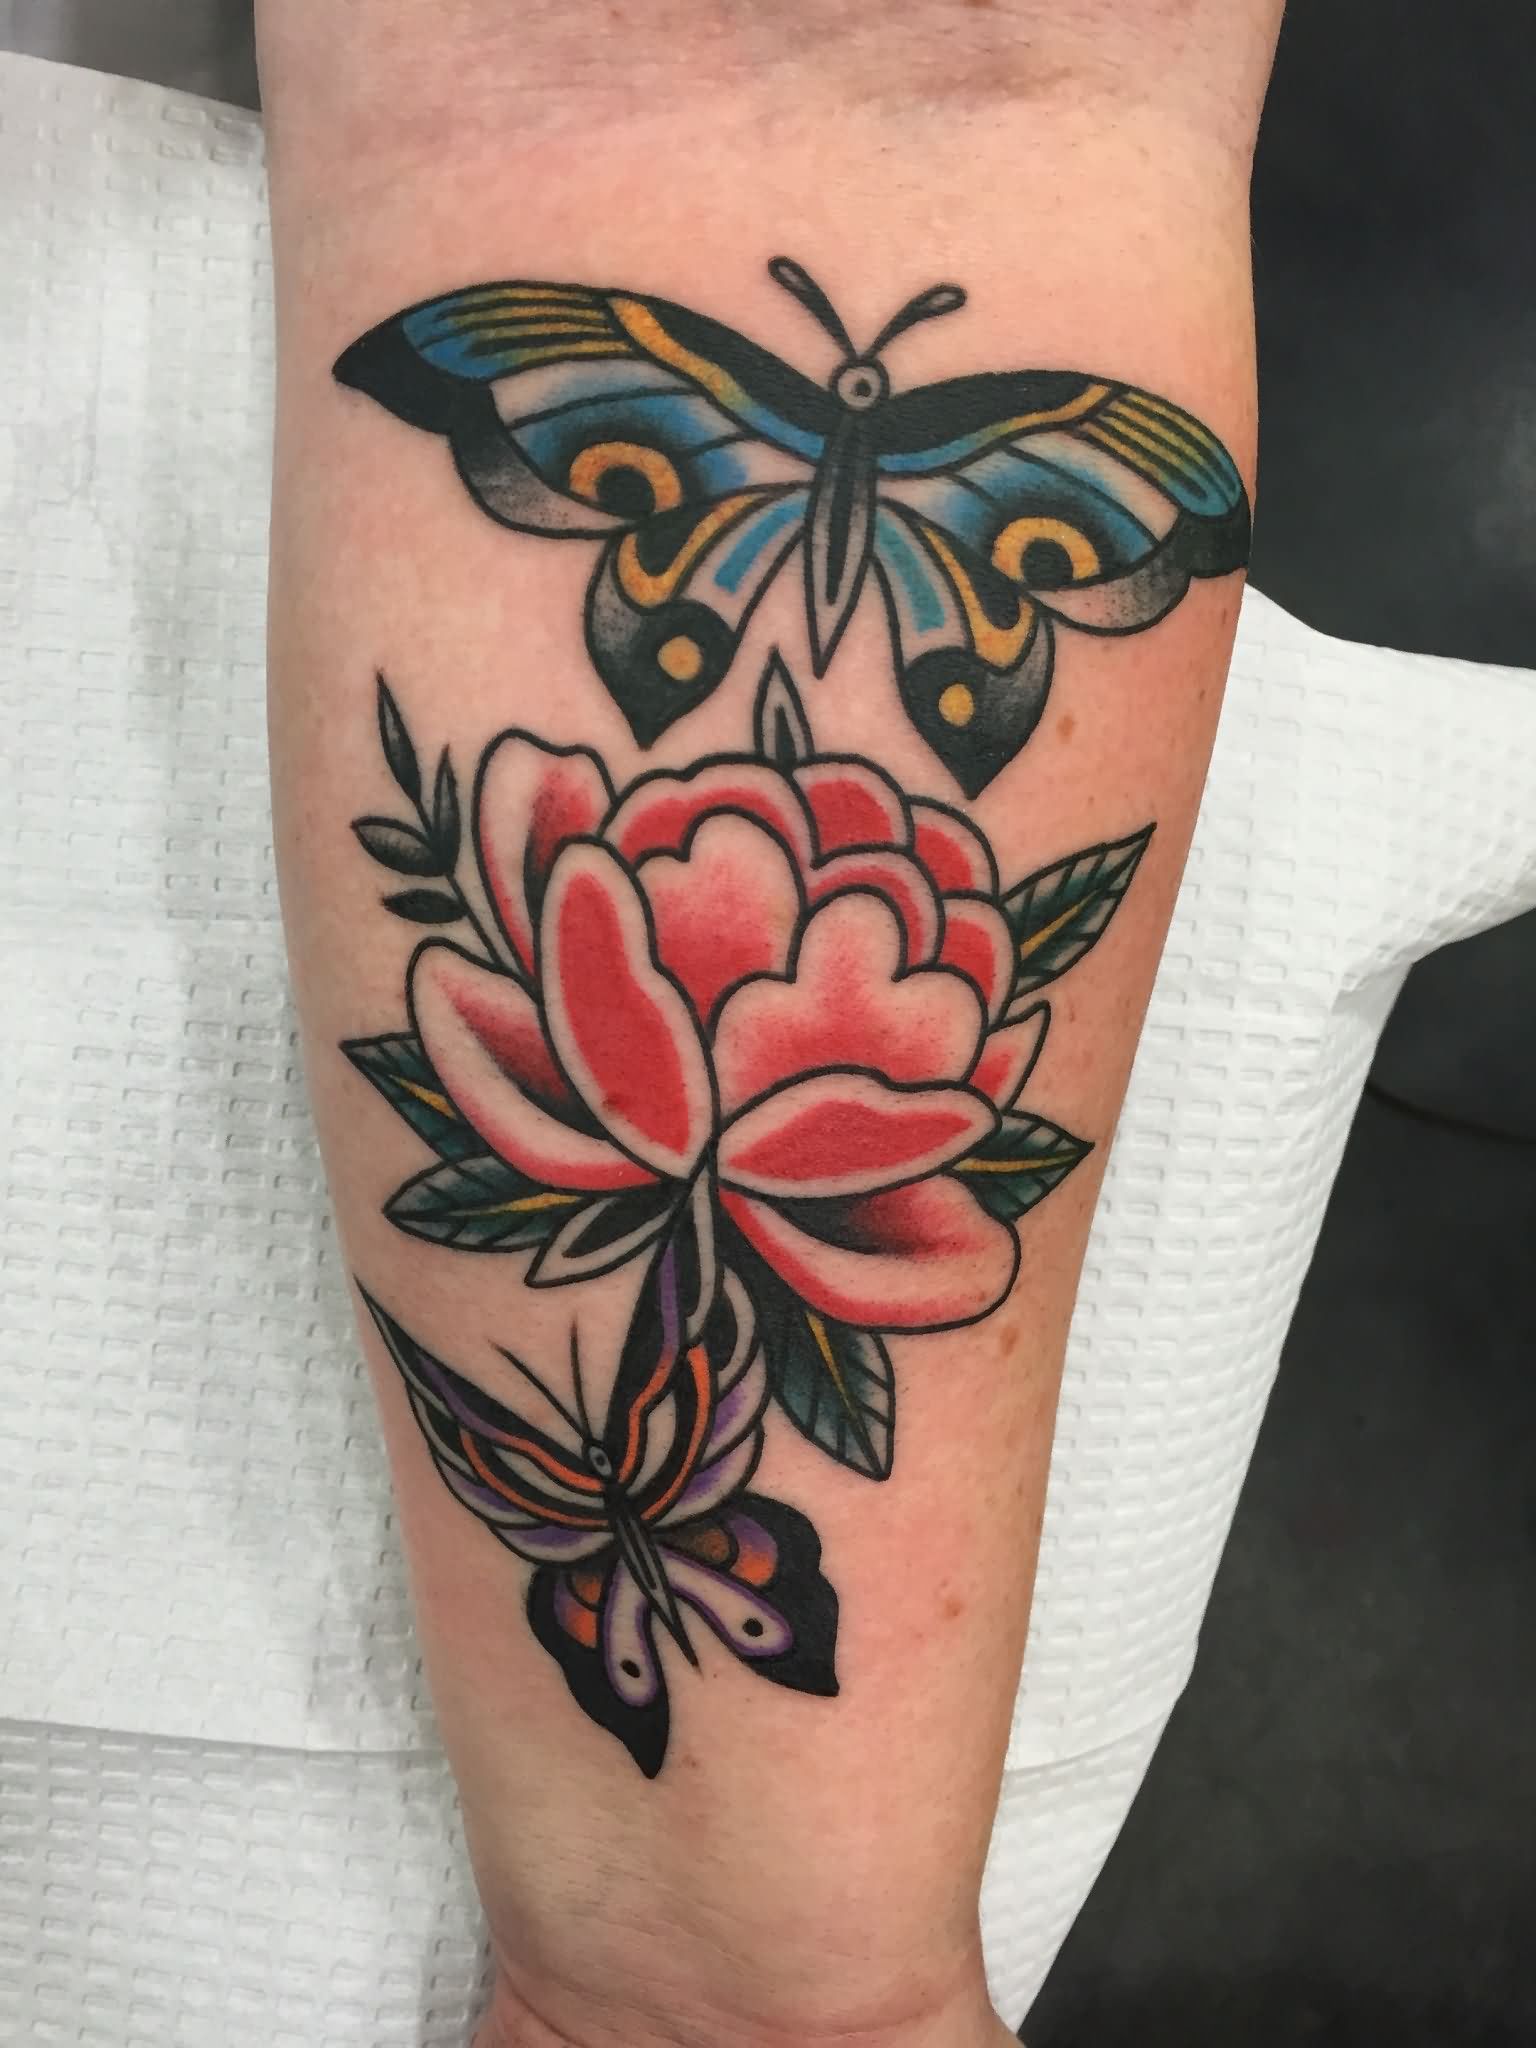 Traditional Flower With Two Flying Butterflies Tattoo On Forearm By Kohen Meyers